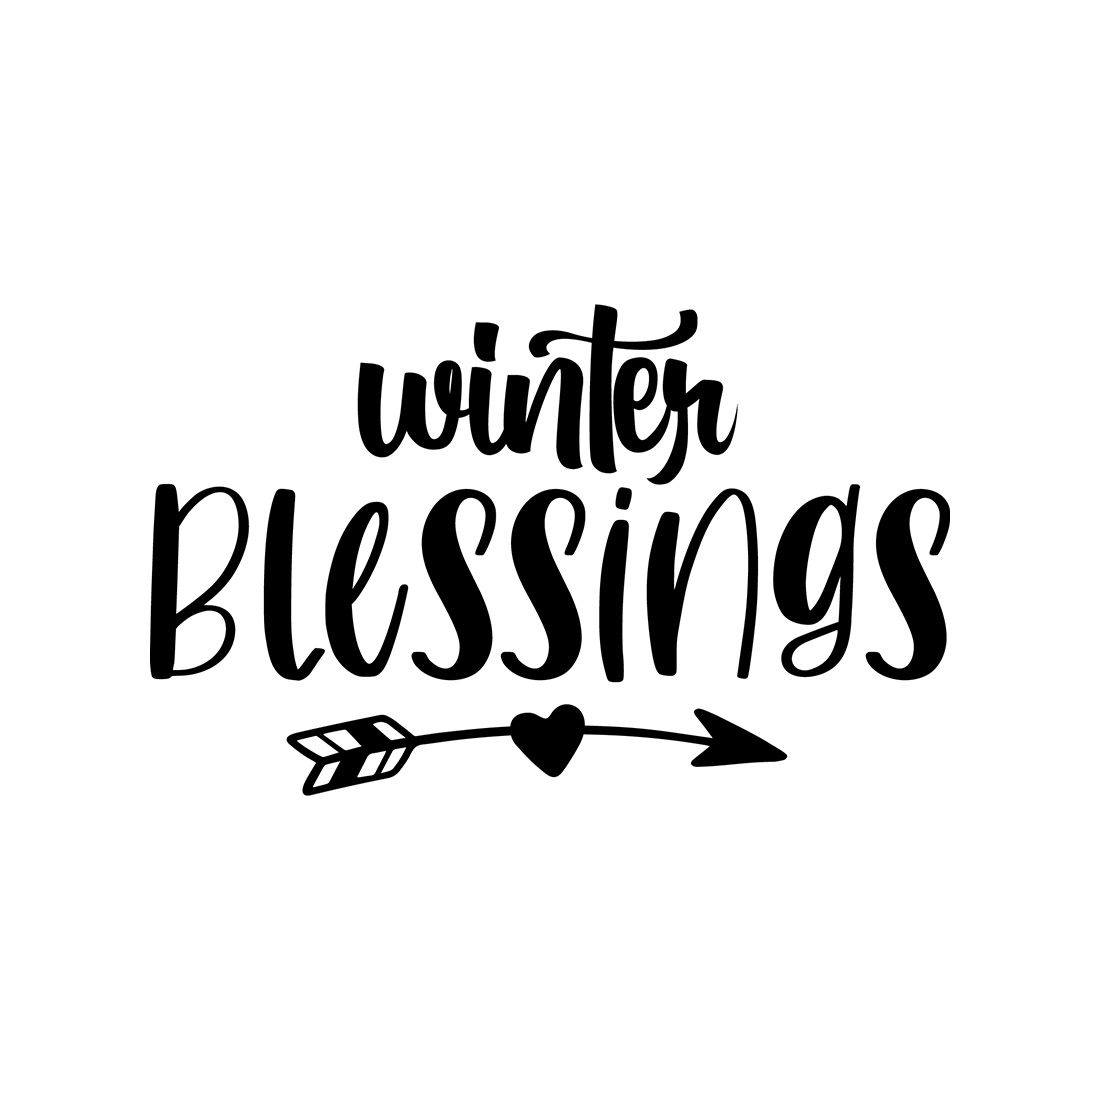 Image with gorgeous black lettering for Winter Blessings prints.